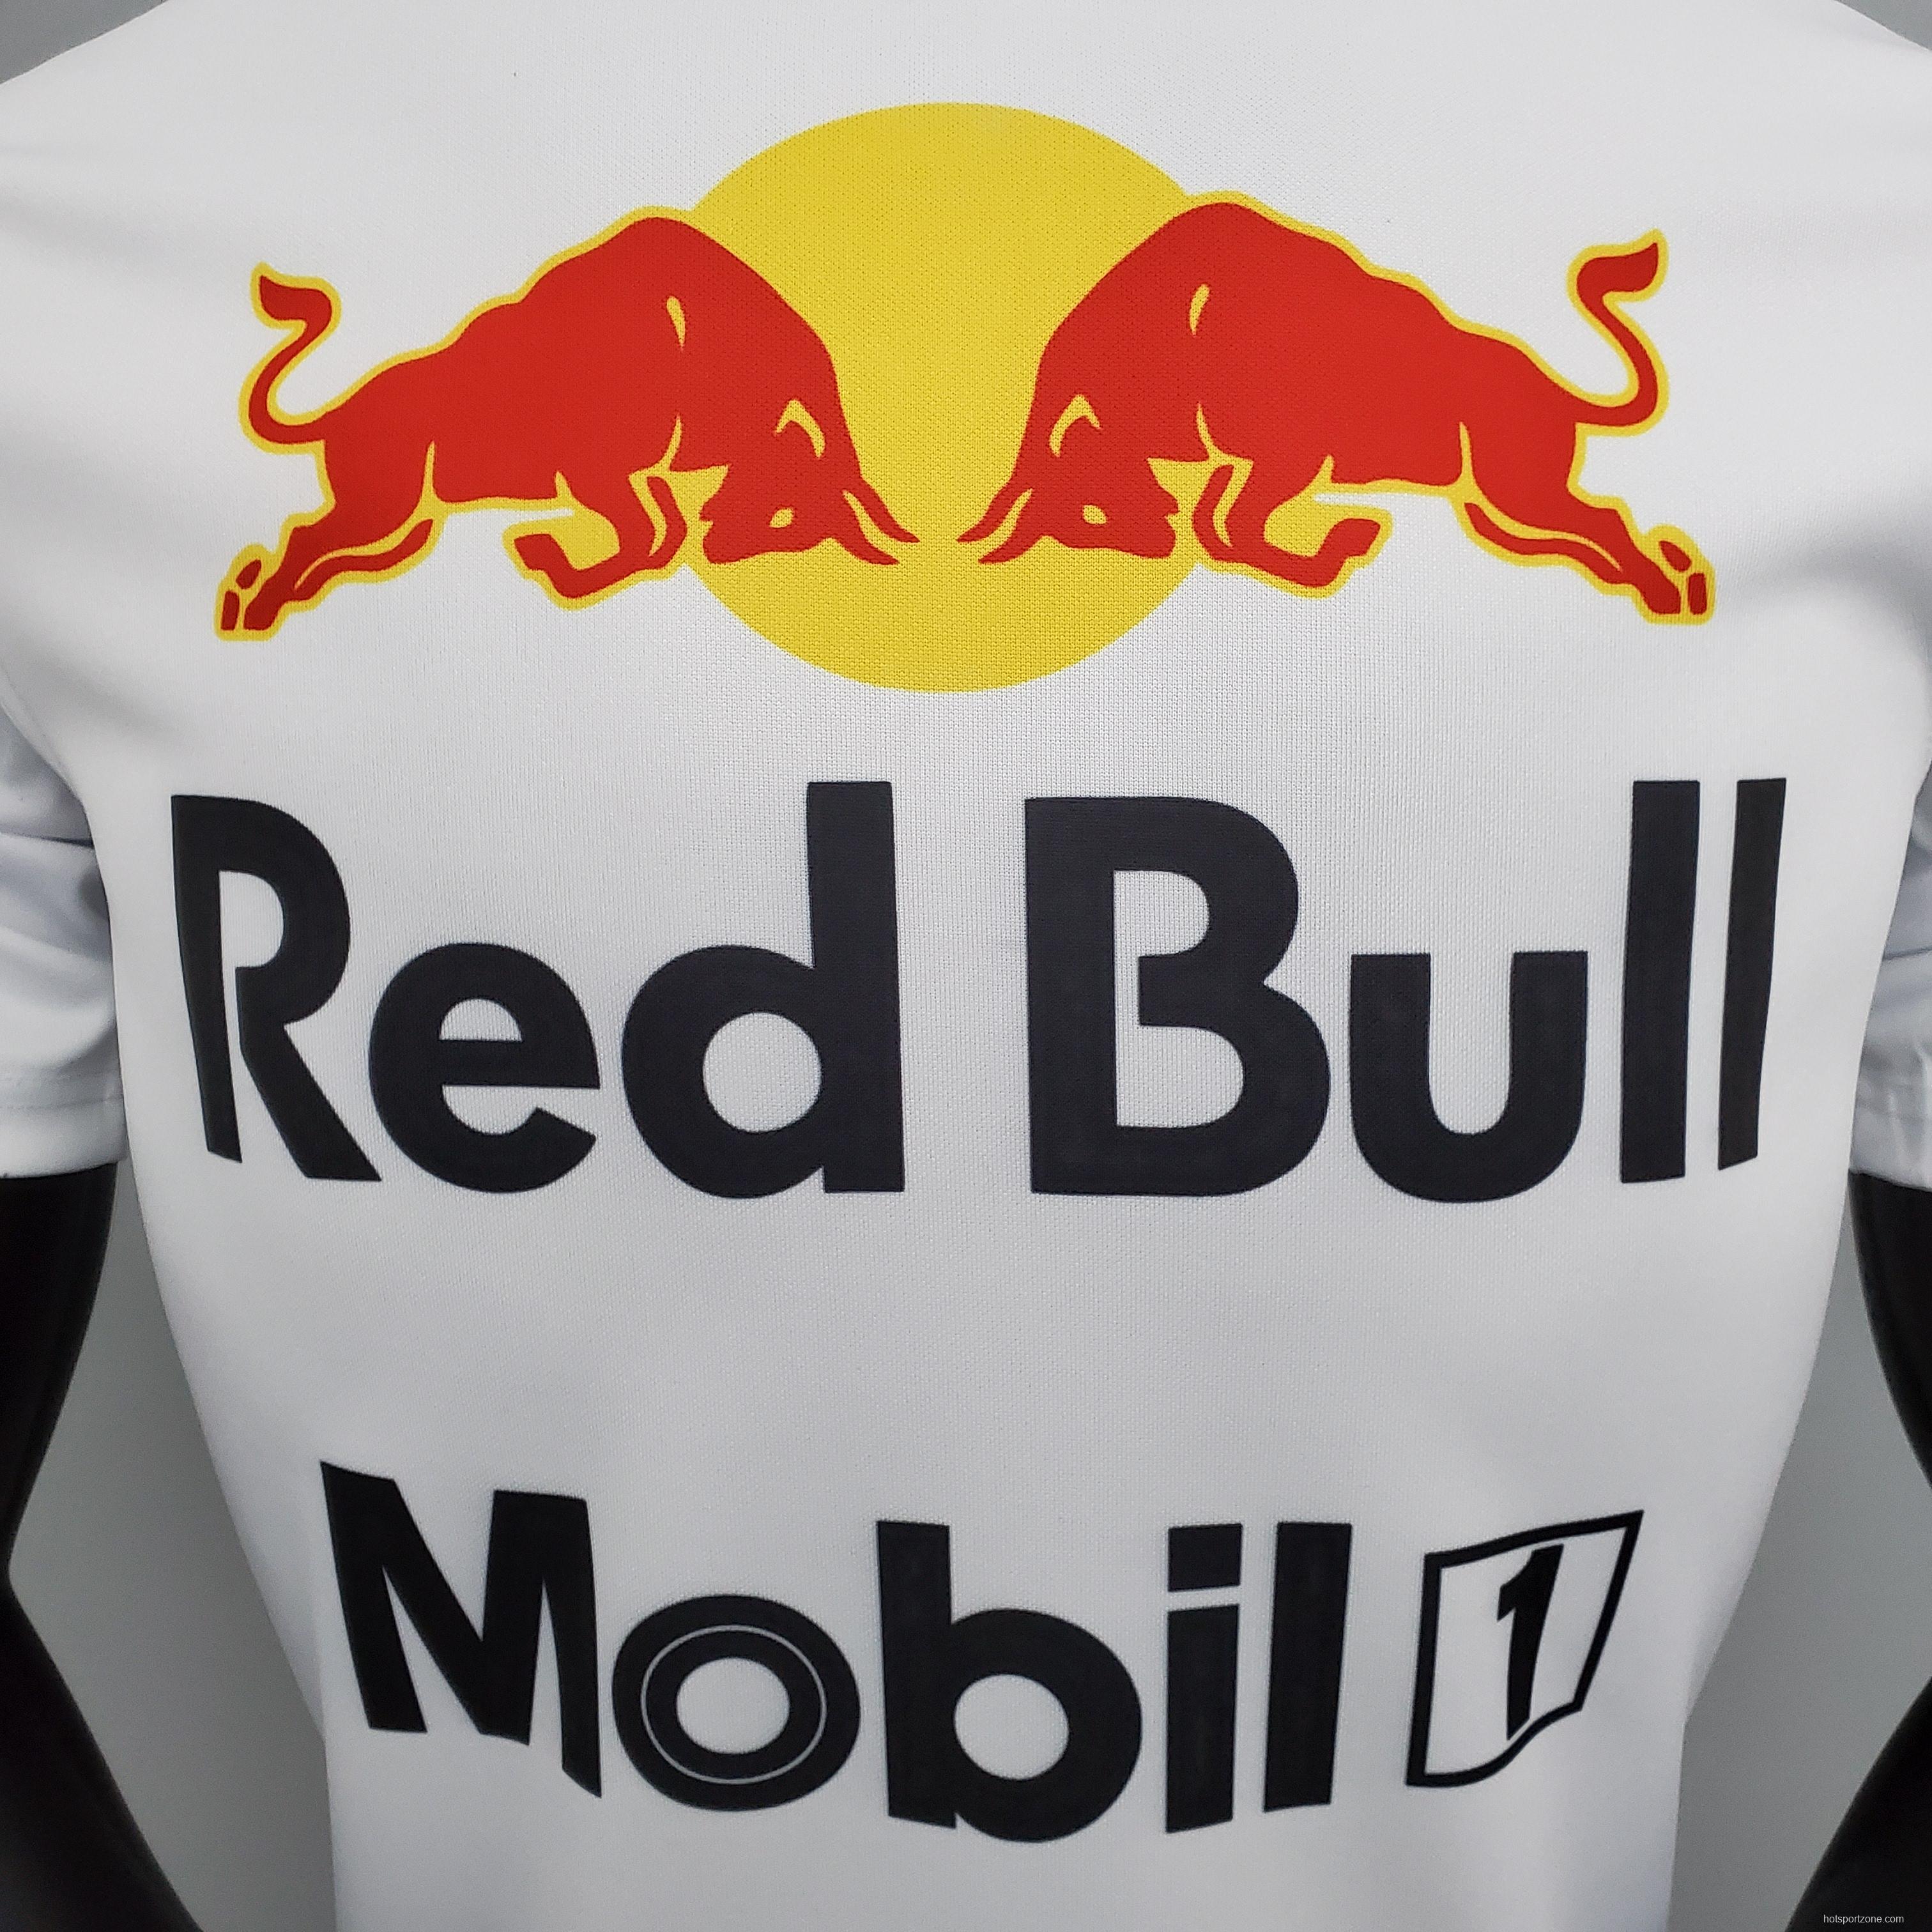 F1 Formula One; Red Bull Racing Suit; White s-5xl